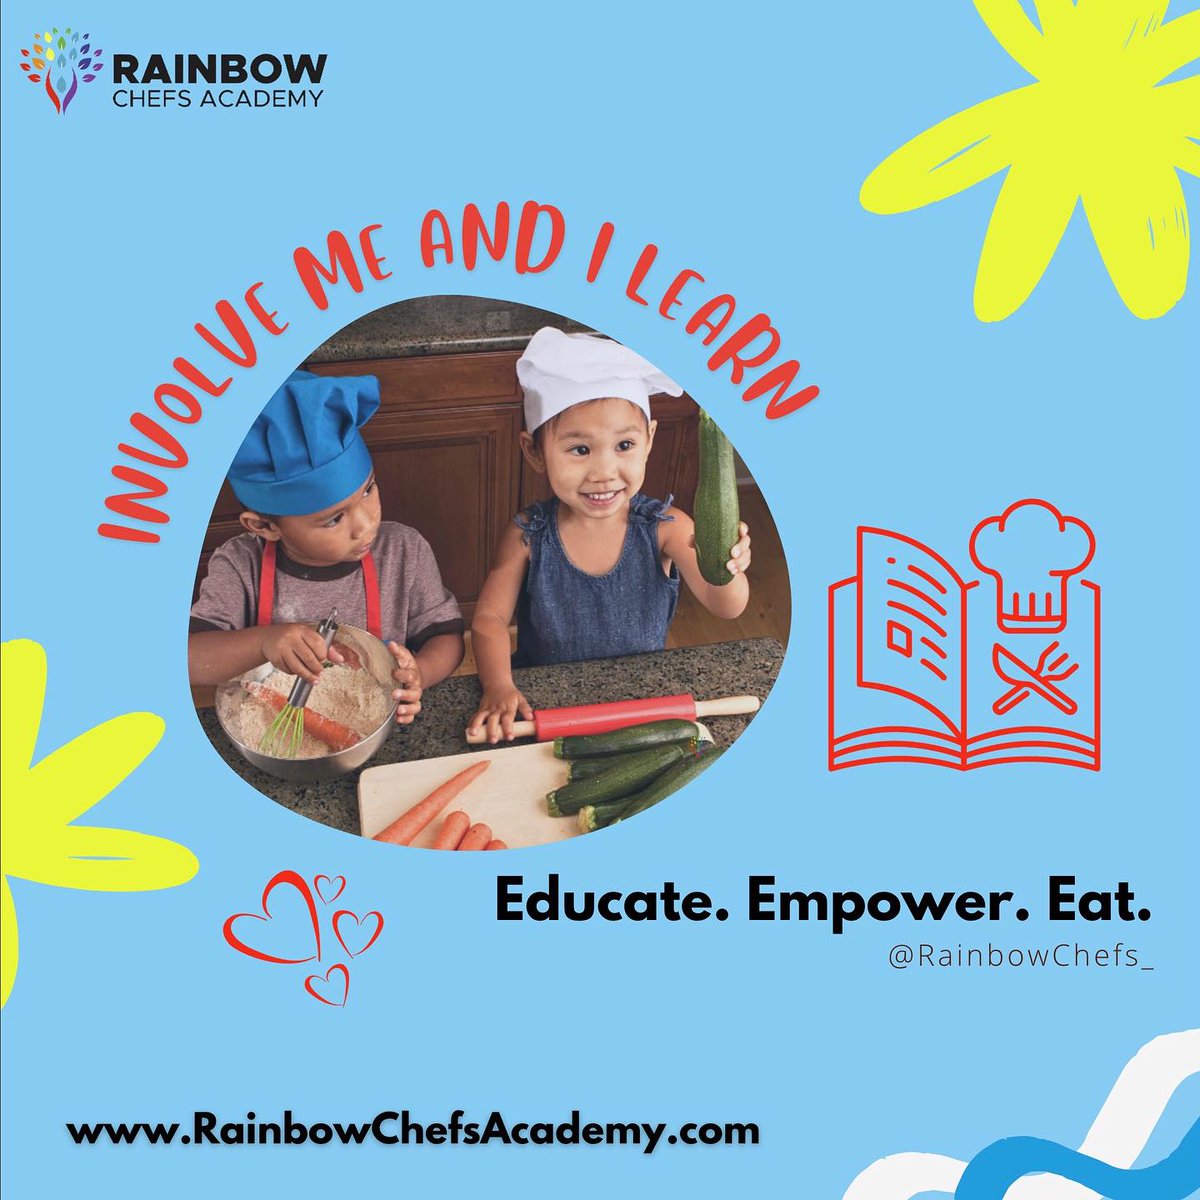 🌈👨‍🍳 Rainbow Chefs: Empowering kids through hands-on cooking! 

'Tell me and I forget, teach me and I may remember, involve me and I learn.'

~ Benjamin Franklin 

🌈 ❤️

#HandsOnLearning #CookingWithKids #NoKitchenRecipes #RainbowChefs